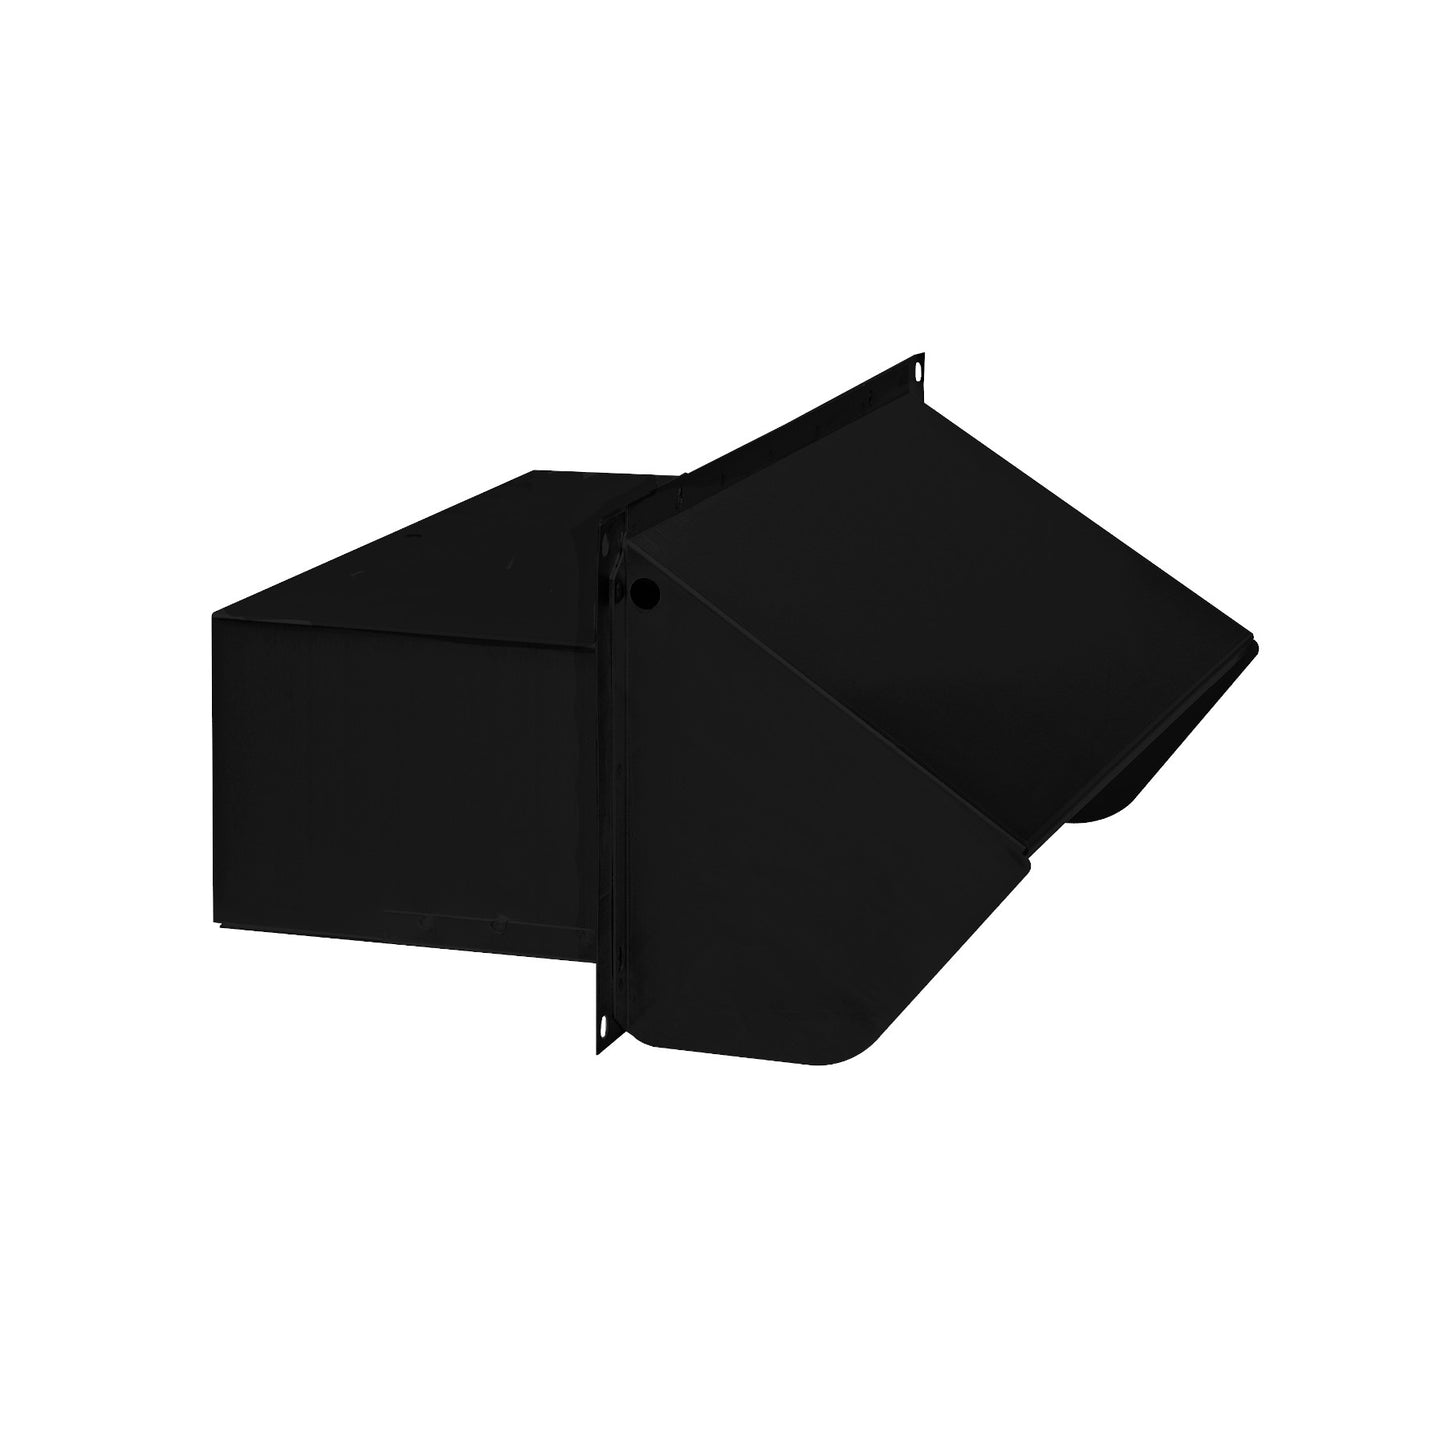 639 - Steel Wall Cap for 3-1/4" x 10" Duct - Black